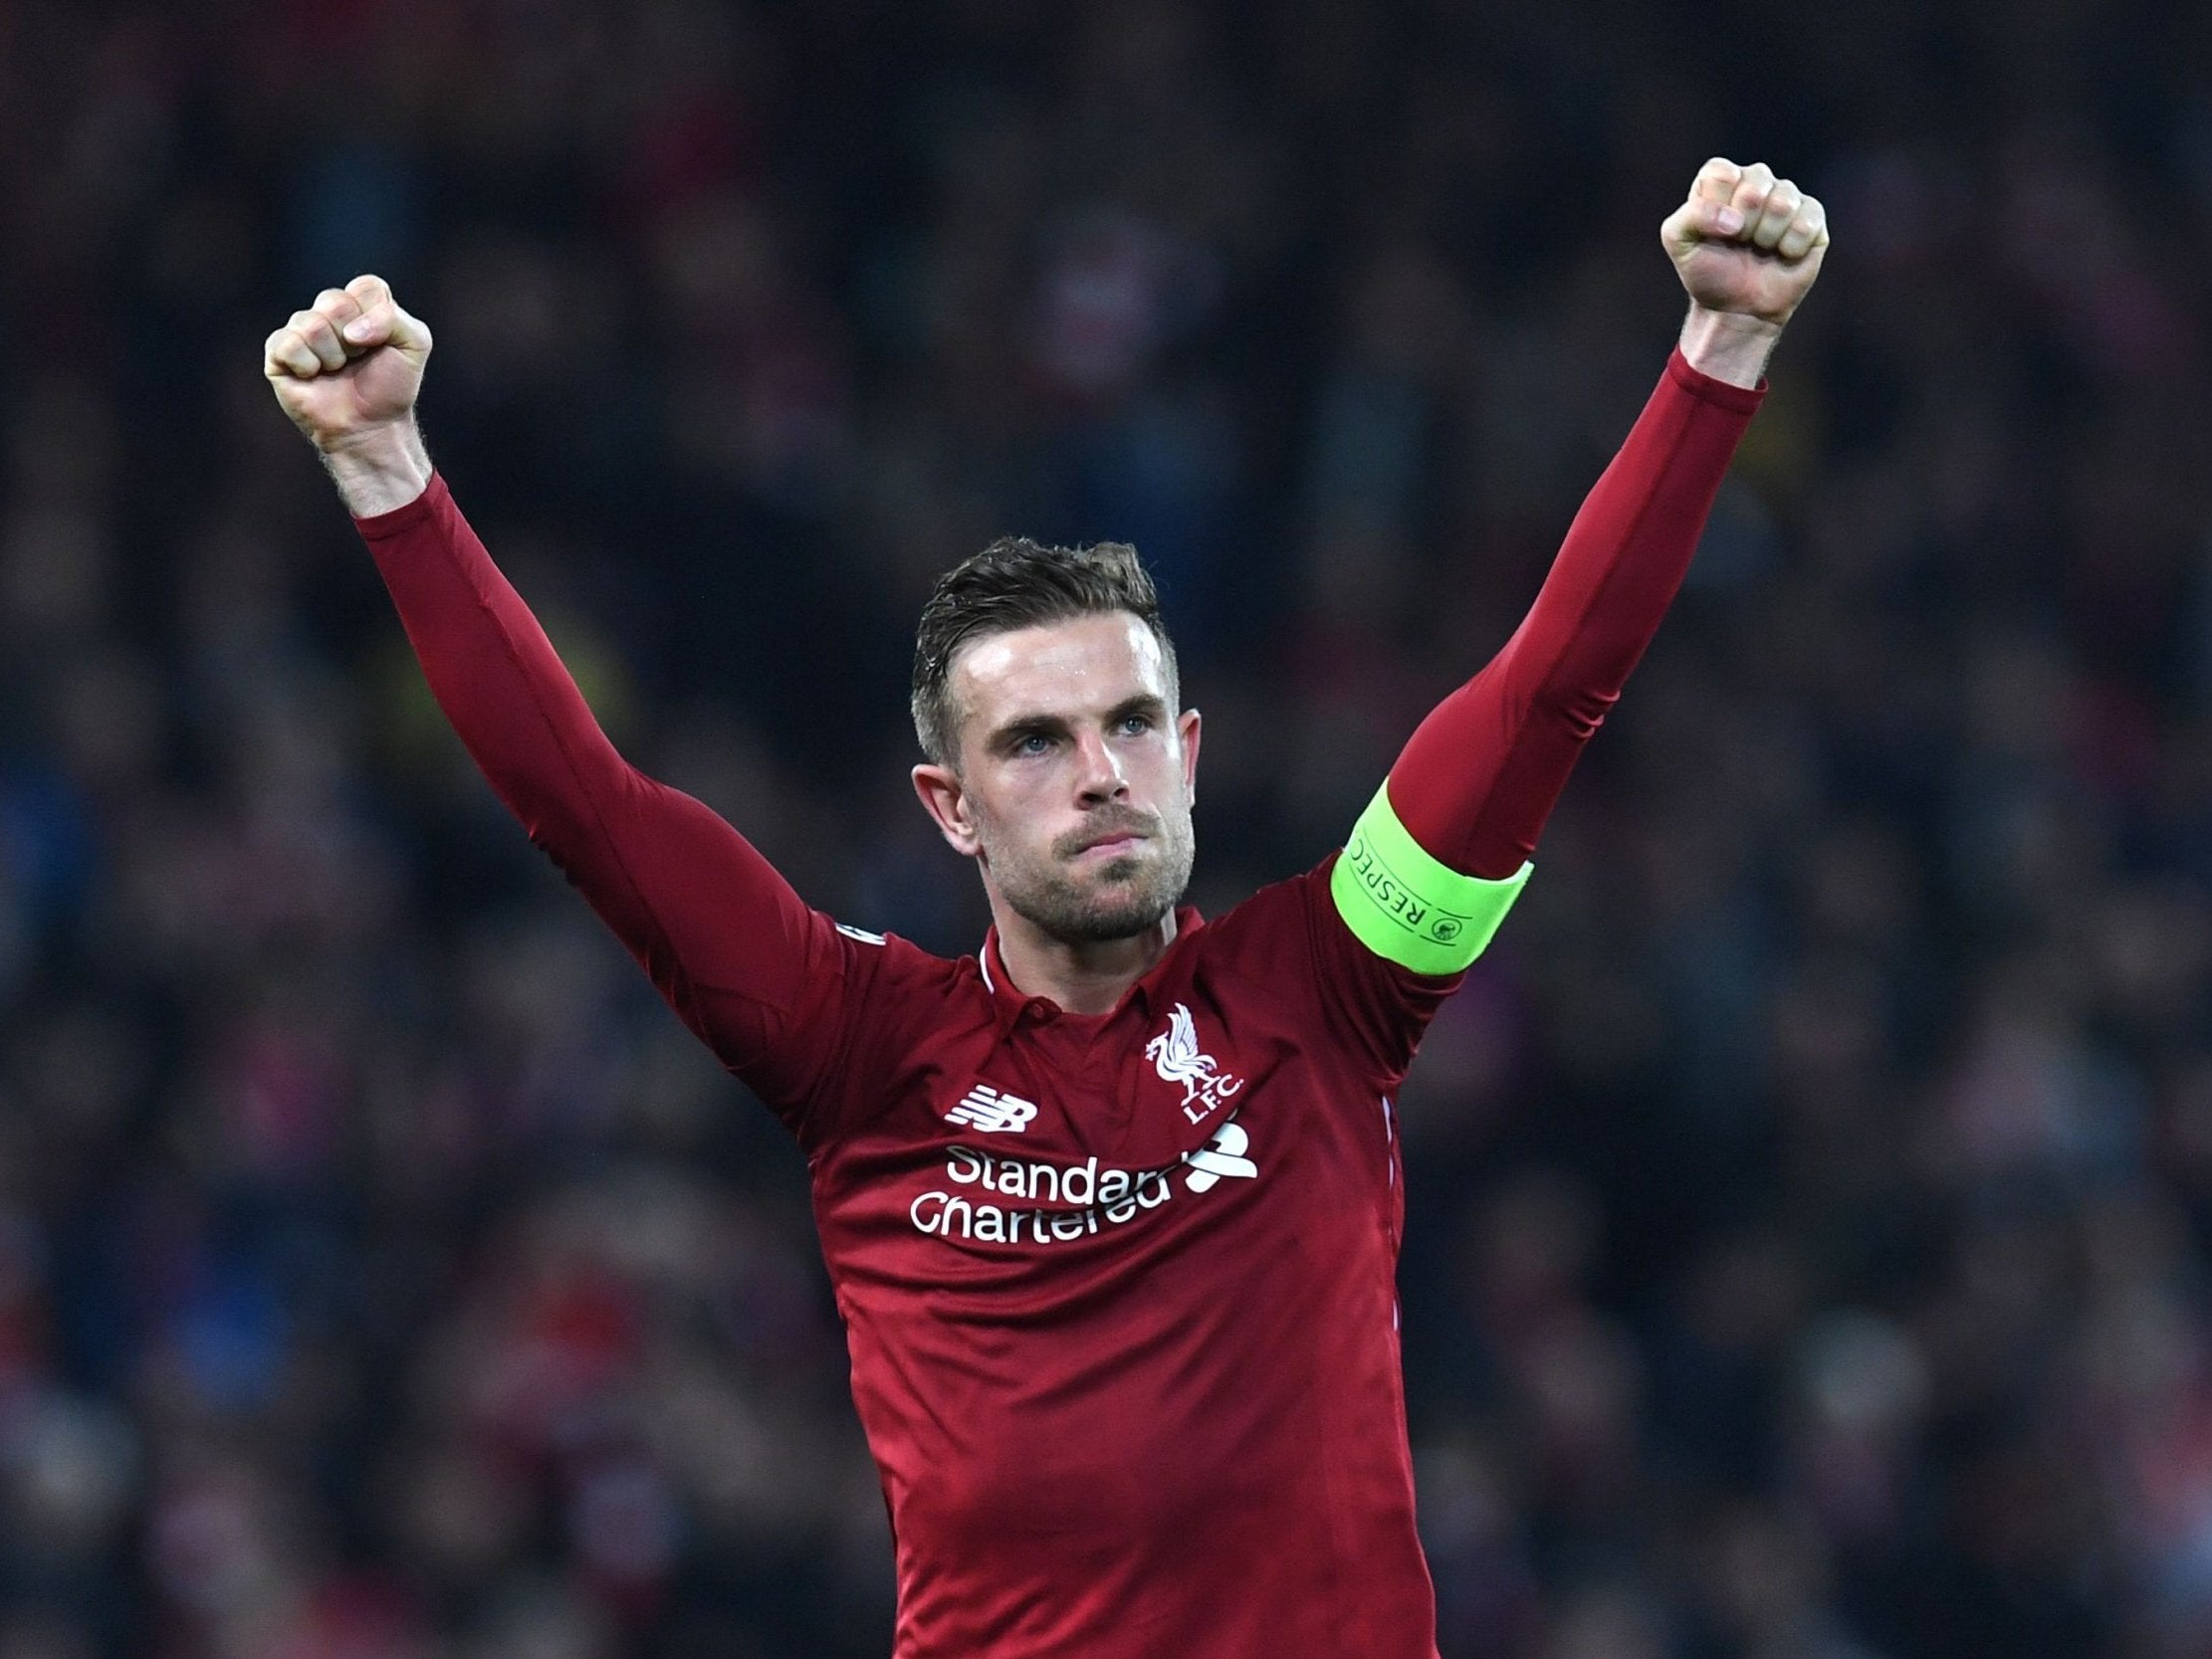 Jordan Henderson celebrates after the final whistle at Anfield